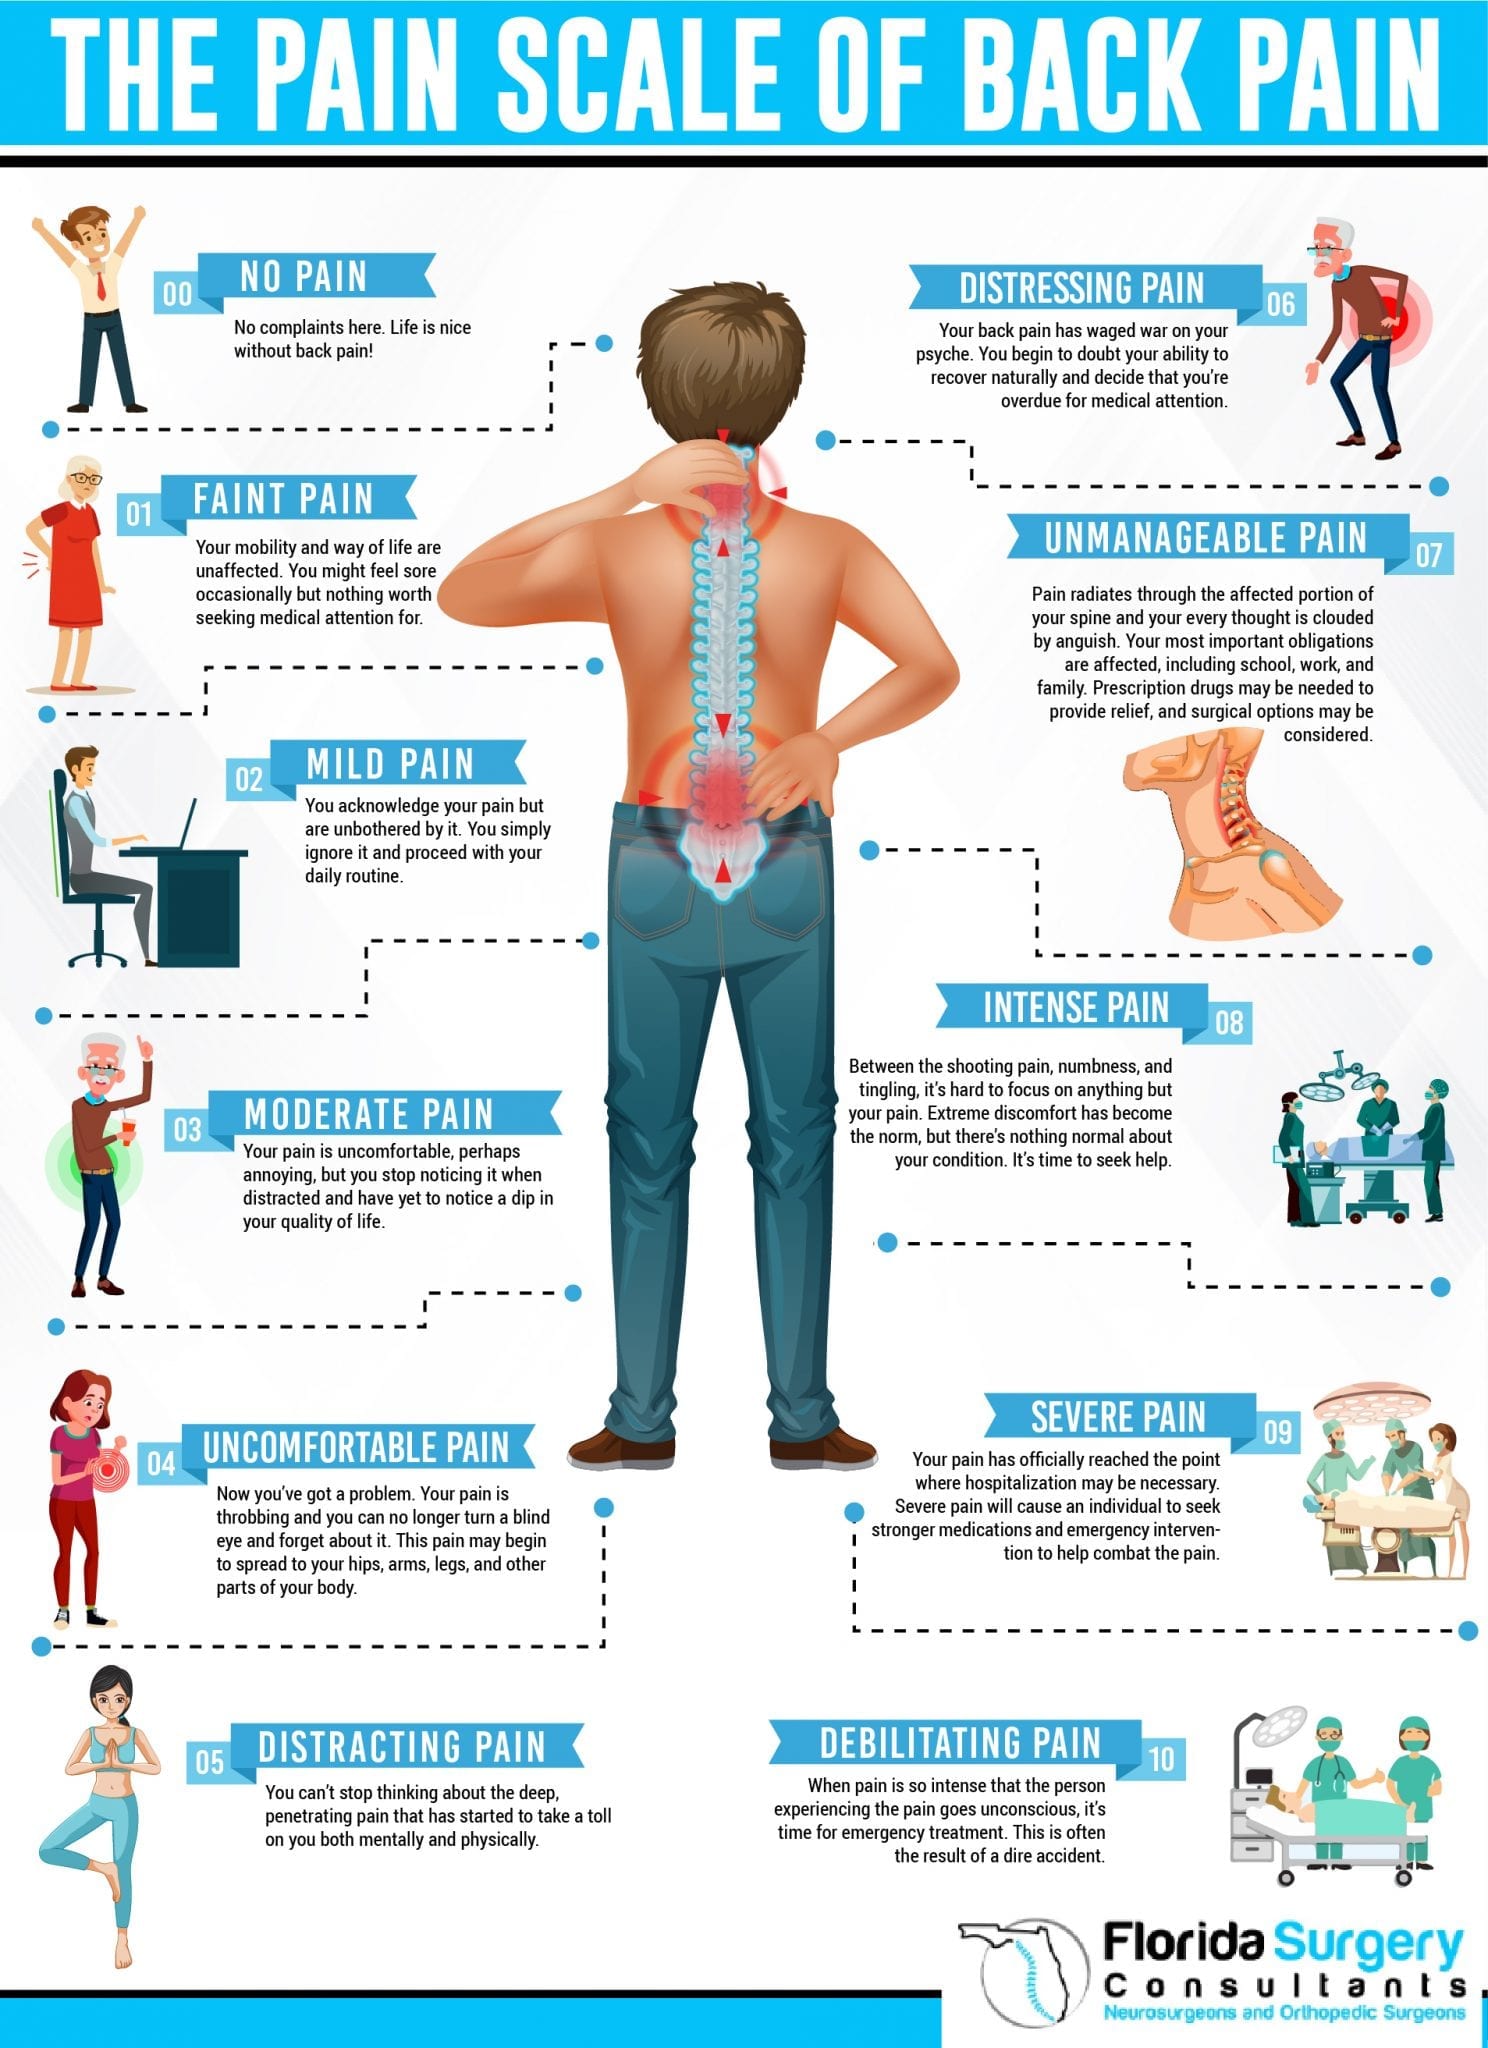 Herniated Disc and Symptoms (Infographic)